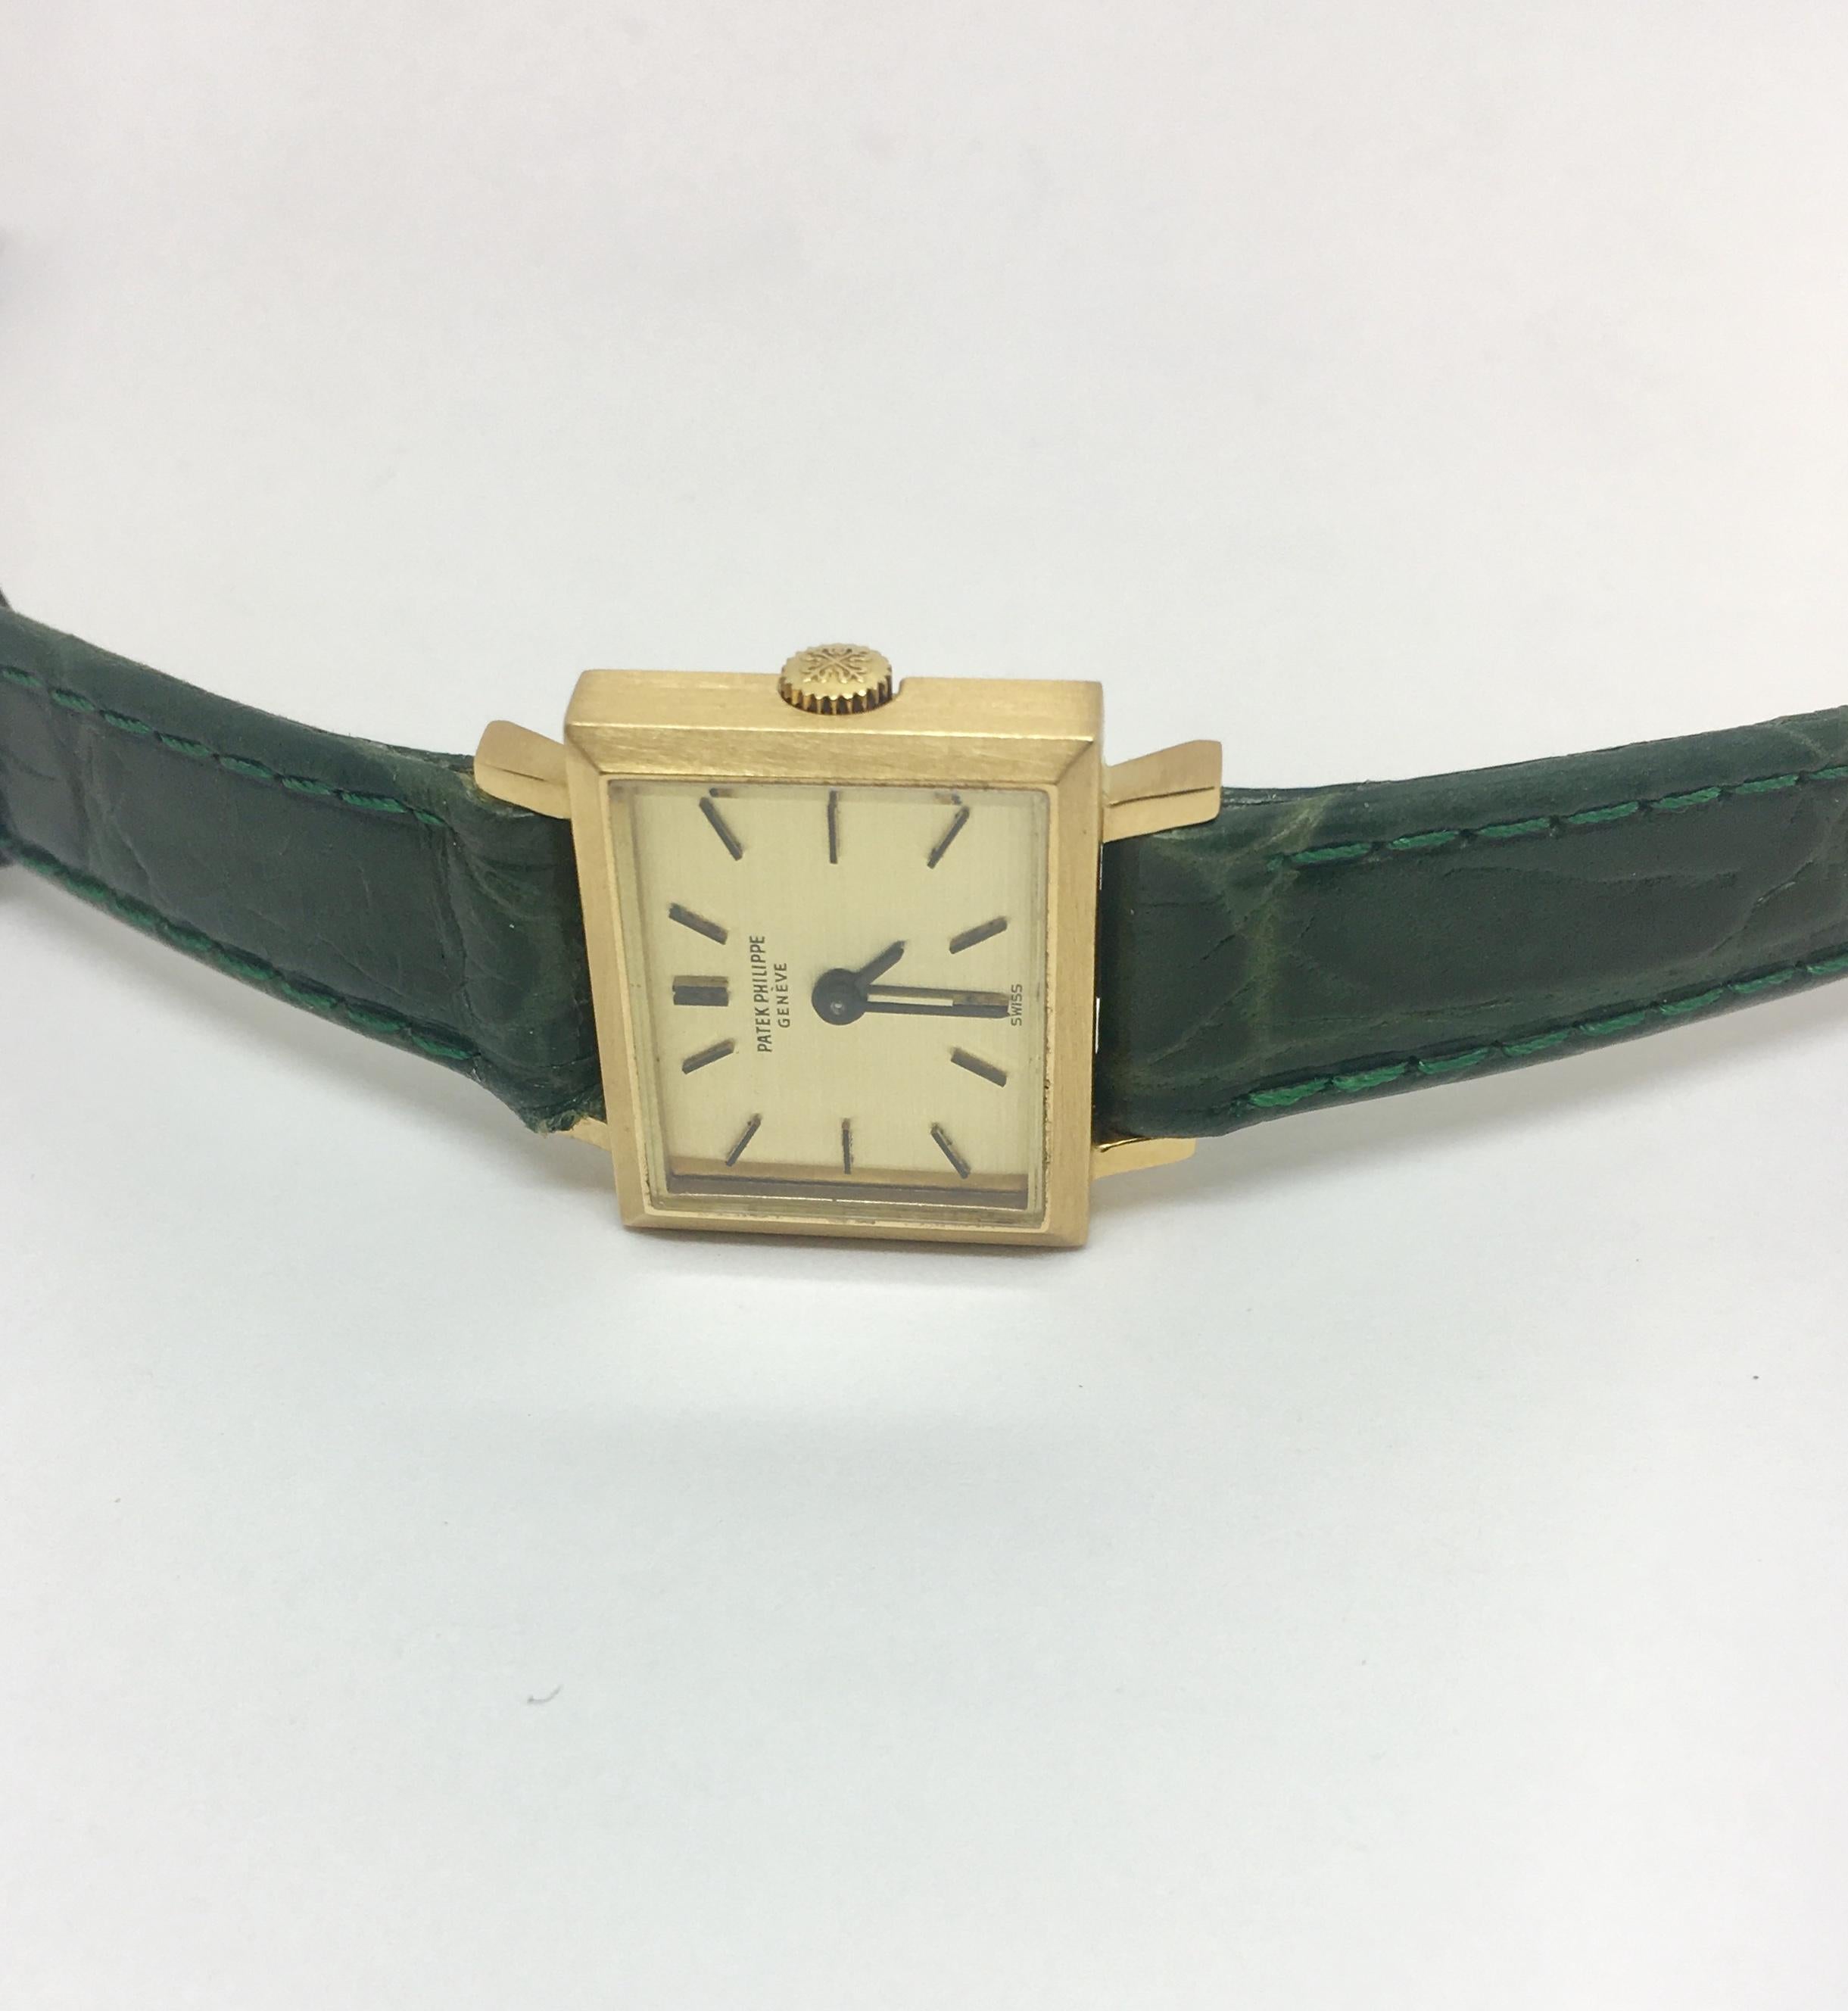 One Patek Philippe 20mm time piece,  18kt yellow gold rectangular case, the approximate inside wrist measurement is 7.25 inches,  the olive green leather watch strap compliments this piece. Circa 1980's
